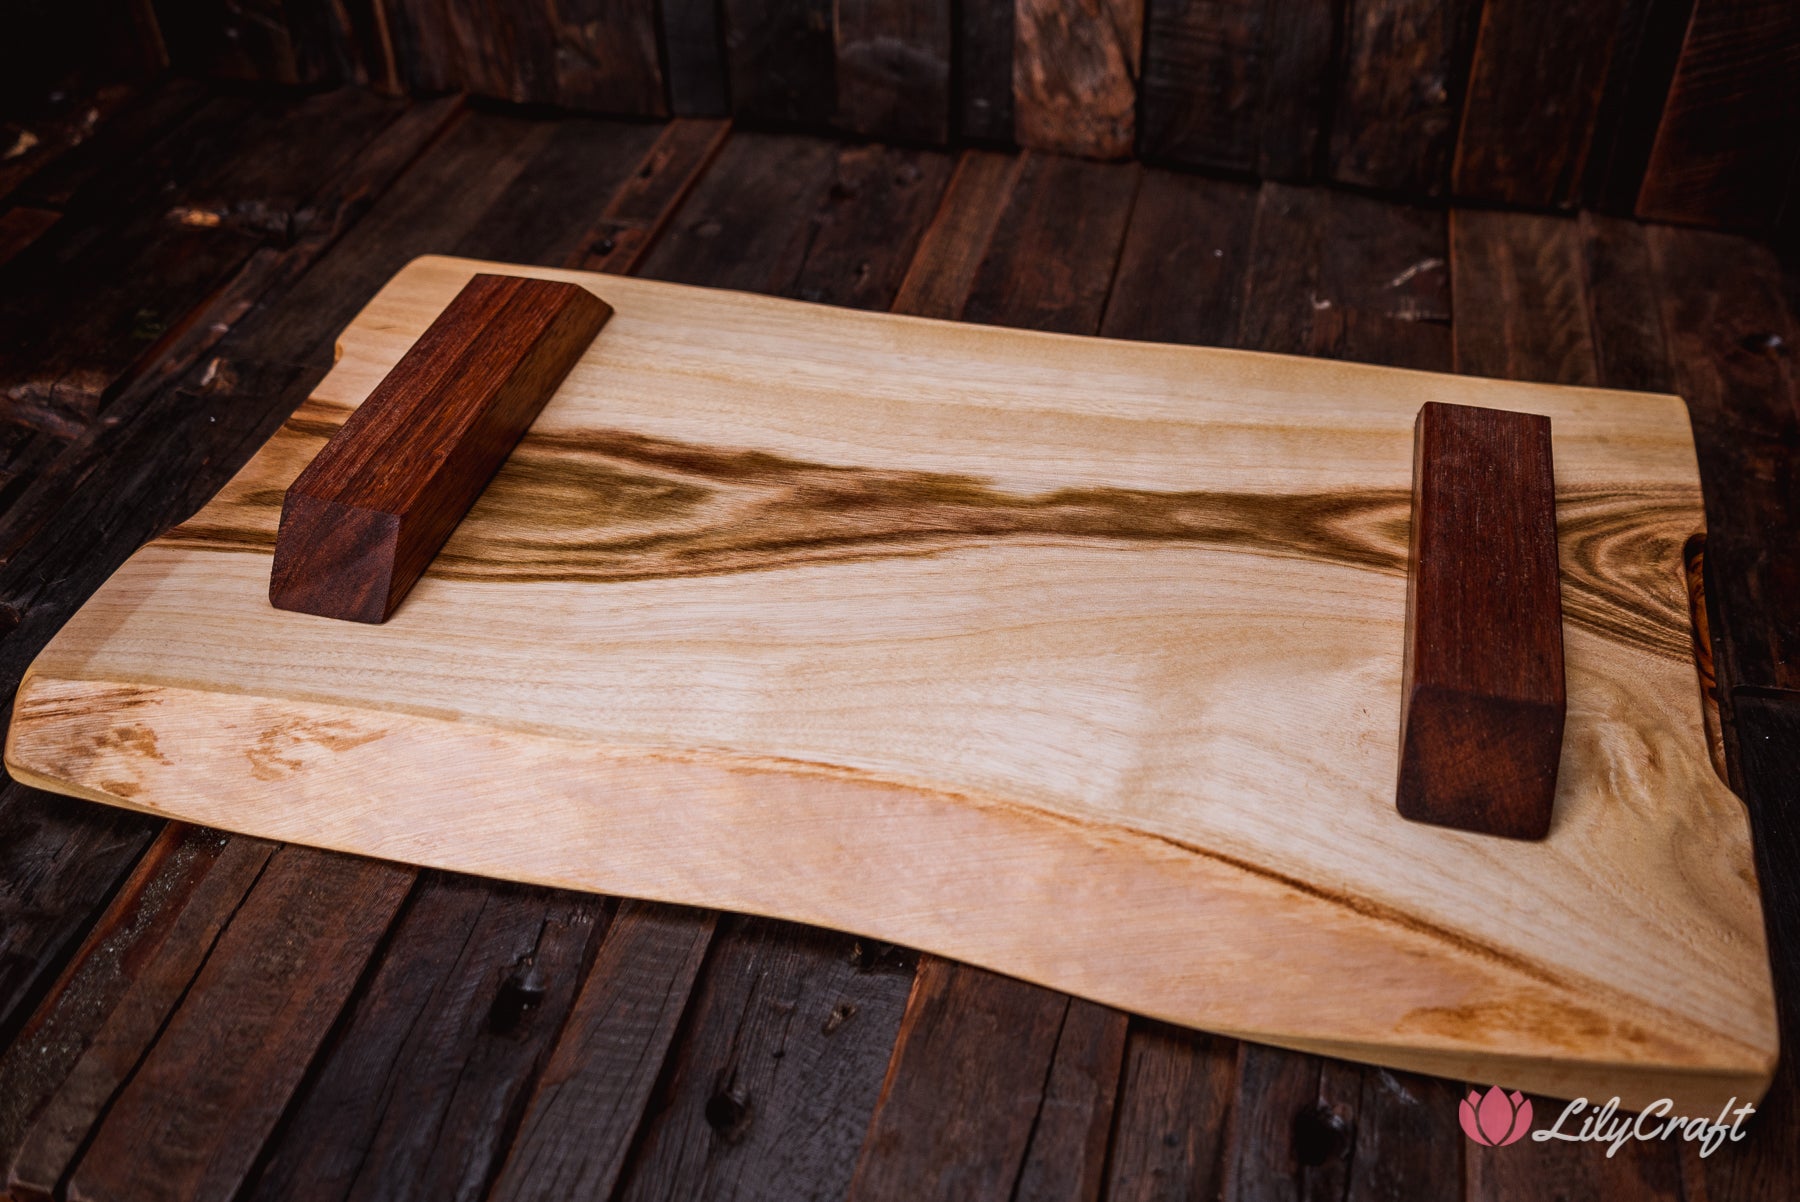 Live Edge Engraved Serving Board - The Natural edge cheese board.